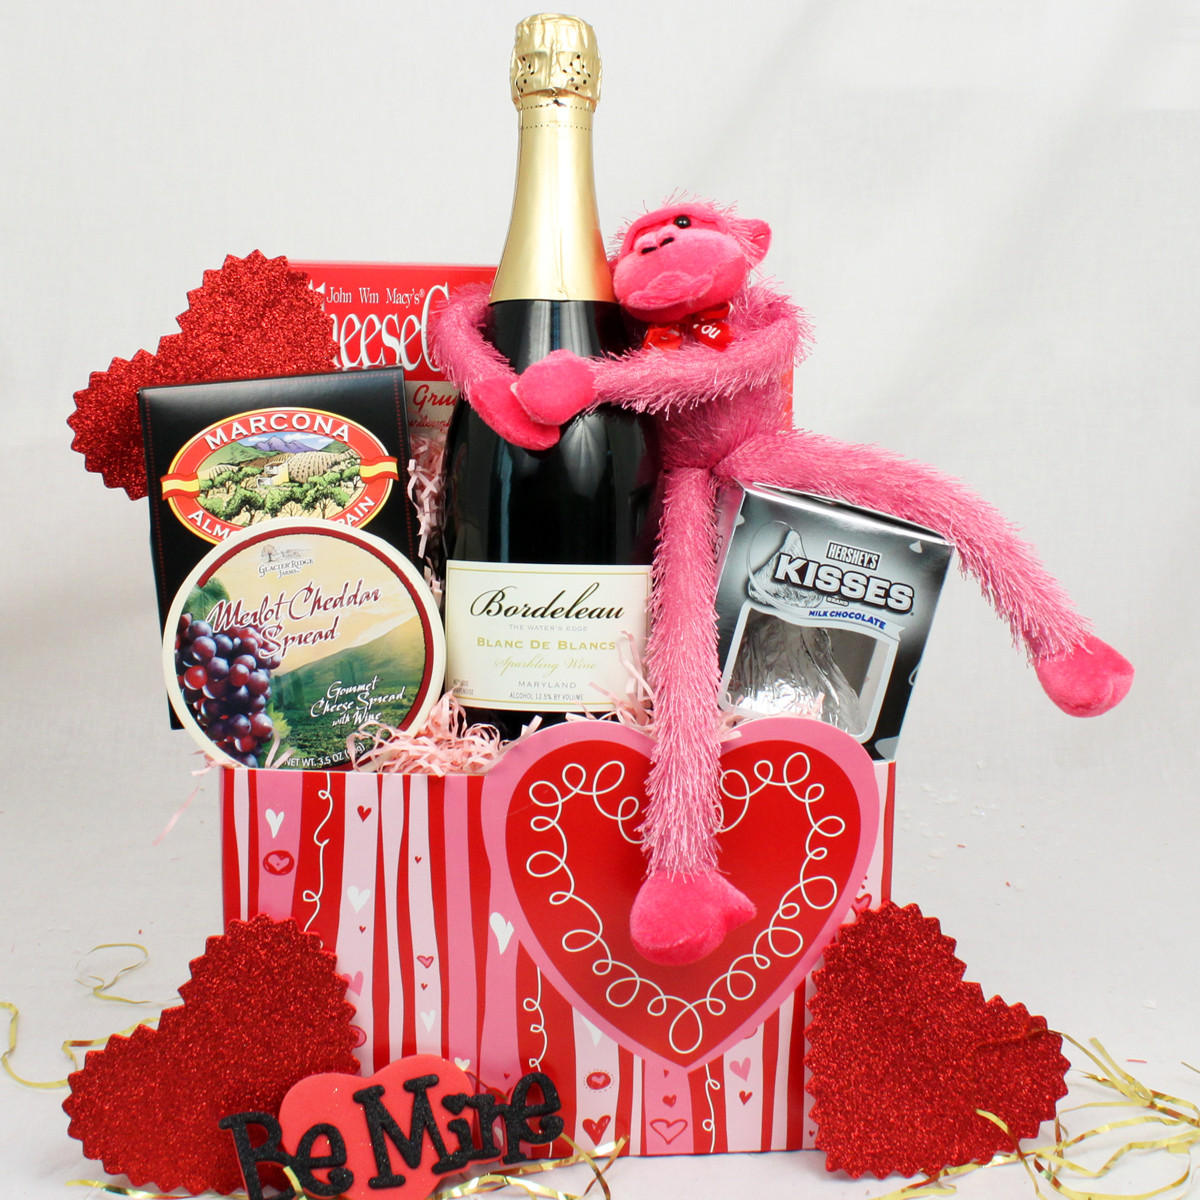 Top Gift Ideas For Valentines Day
 Creative and Thoughtful Valentine’s Day Gifts for Her